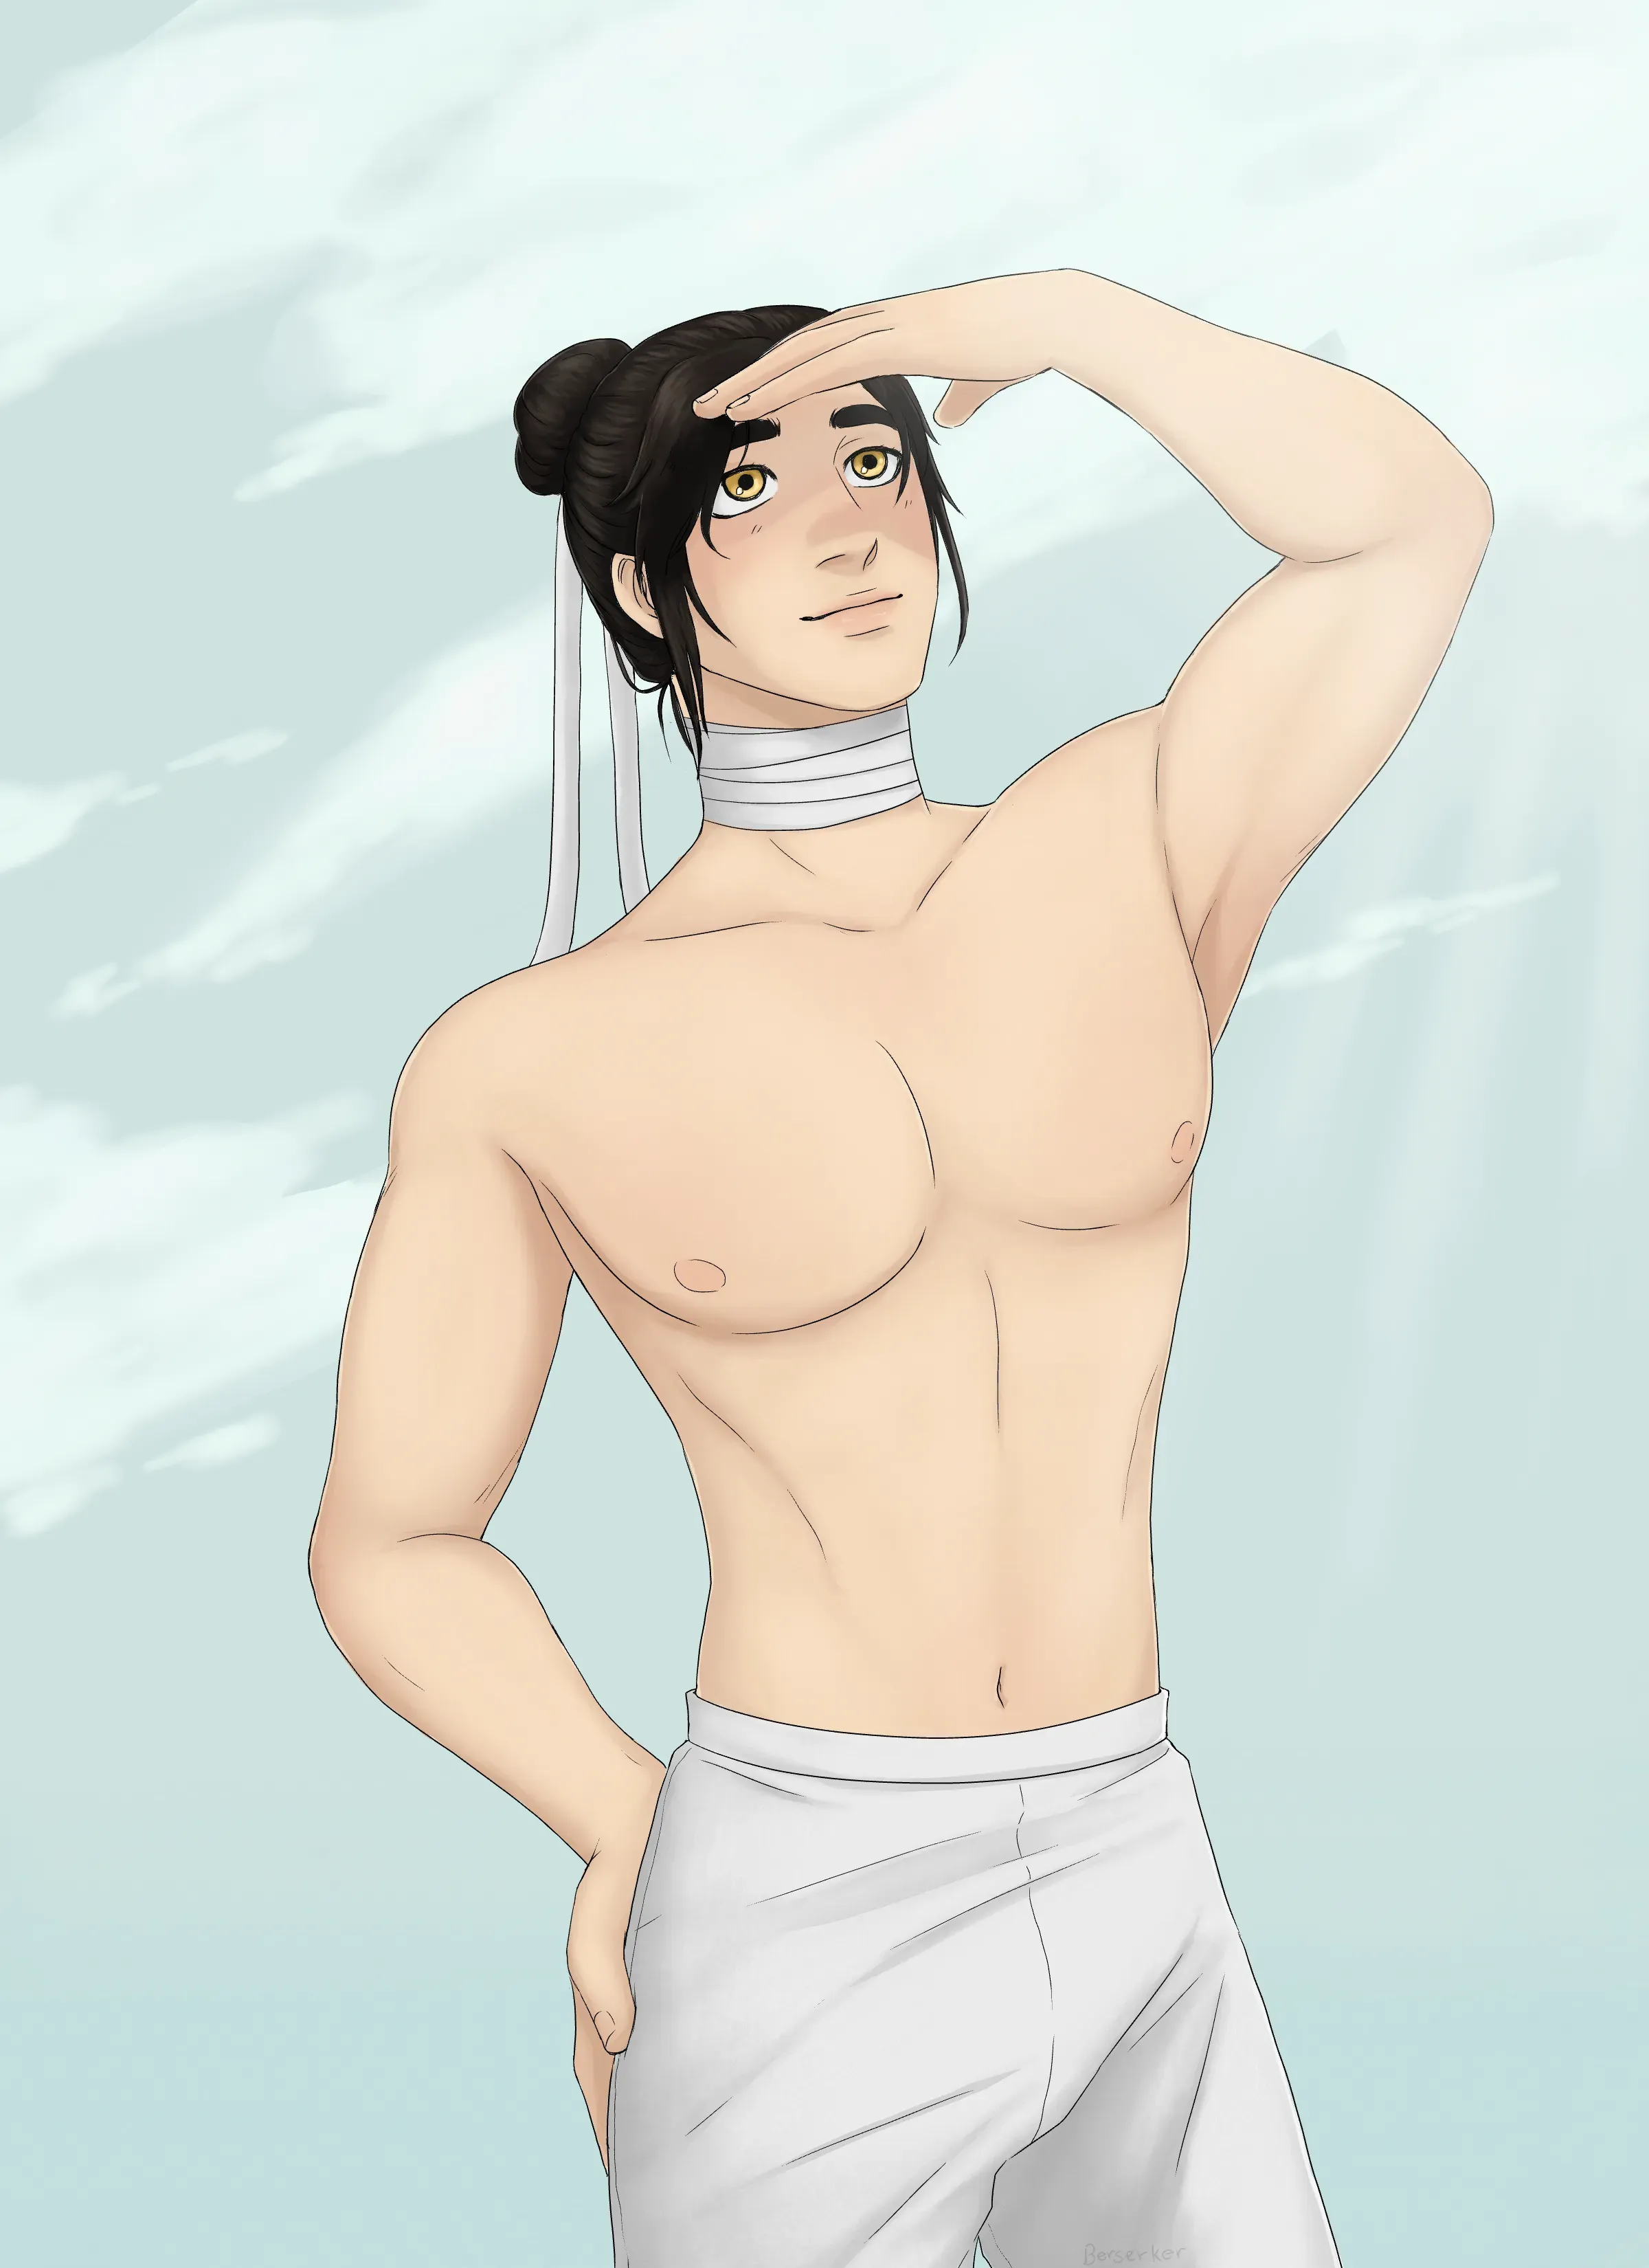 Thirsting after Xie Lian as always